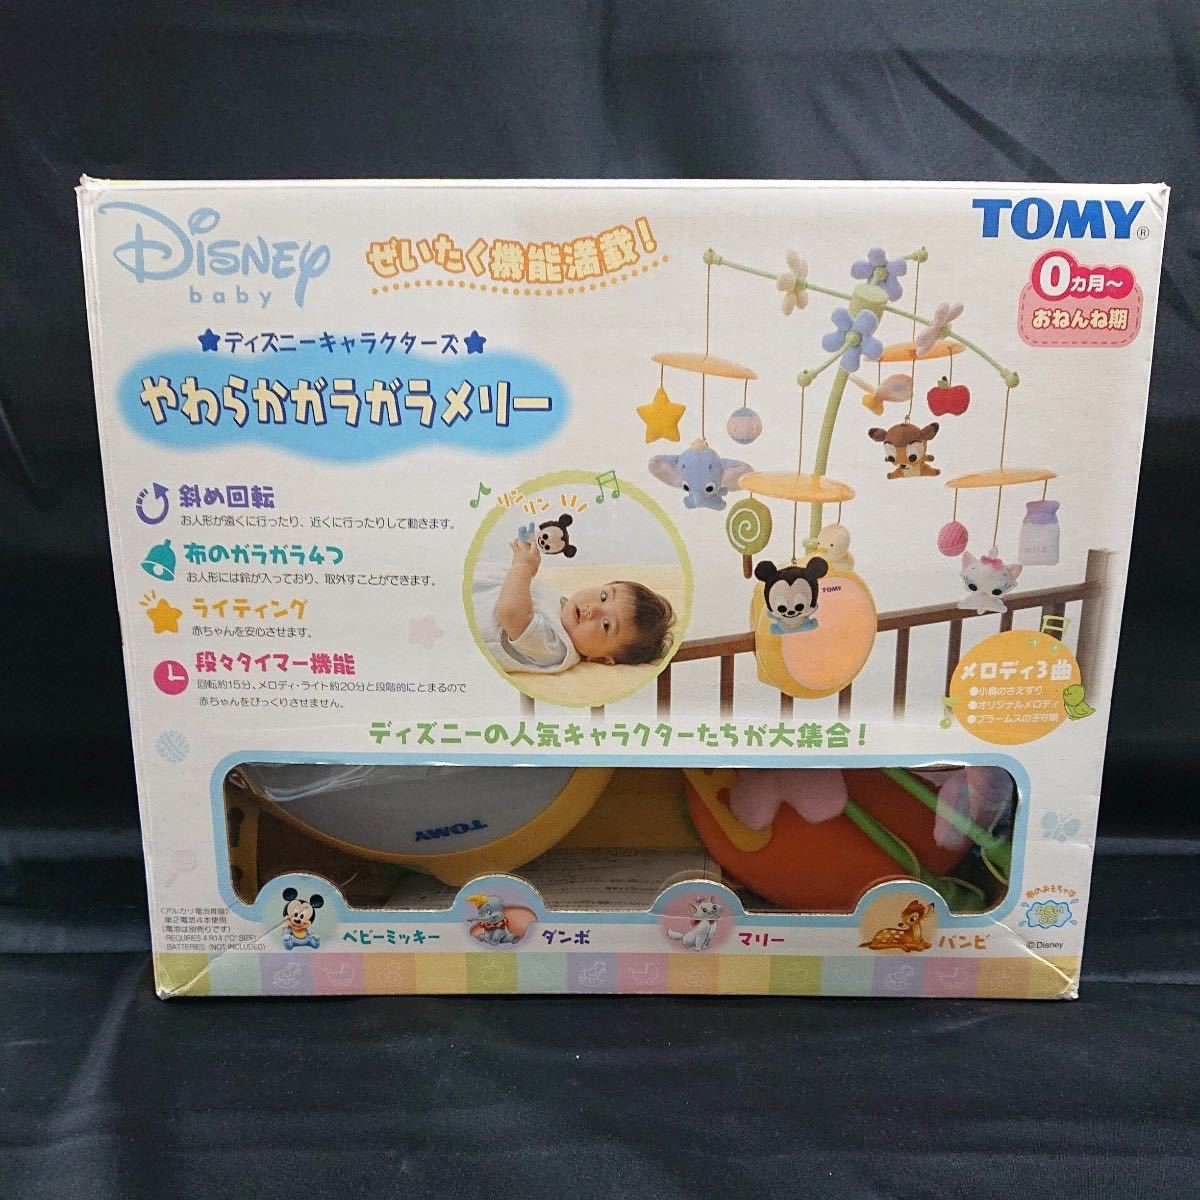 No.43 Disney character z soft rattle me Lee TOMY goods for baby music box 